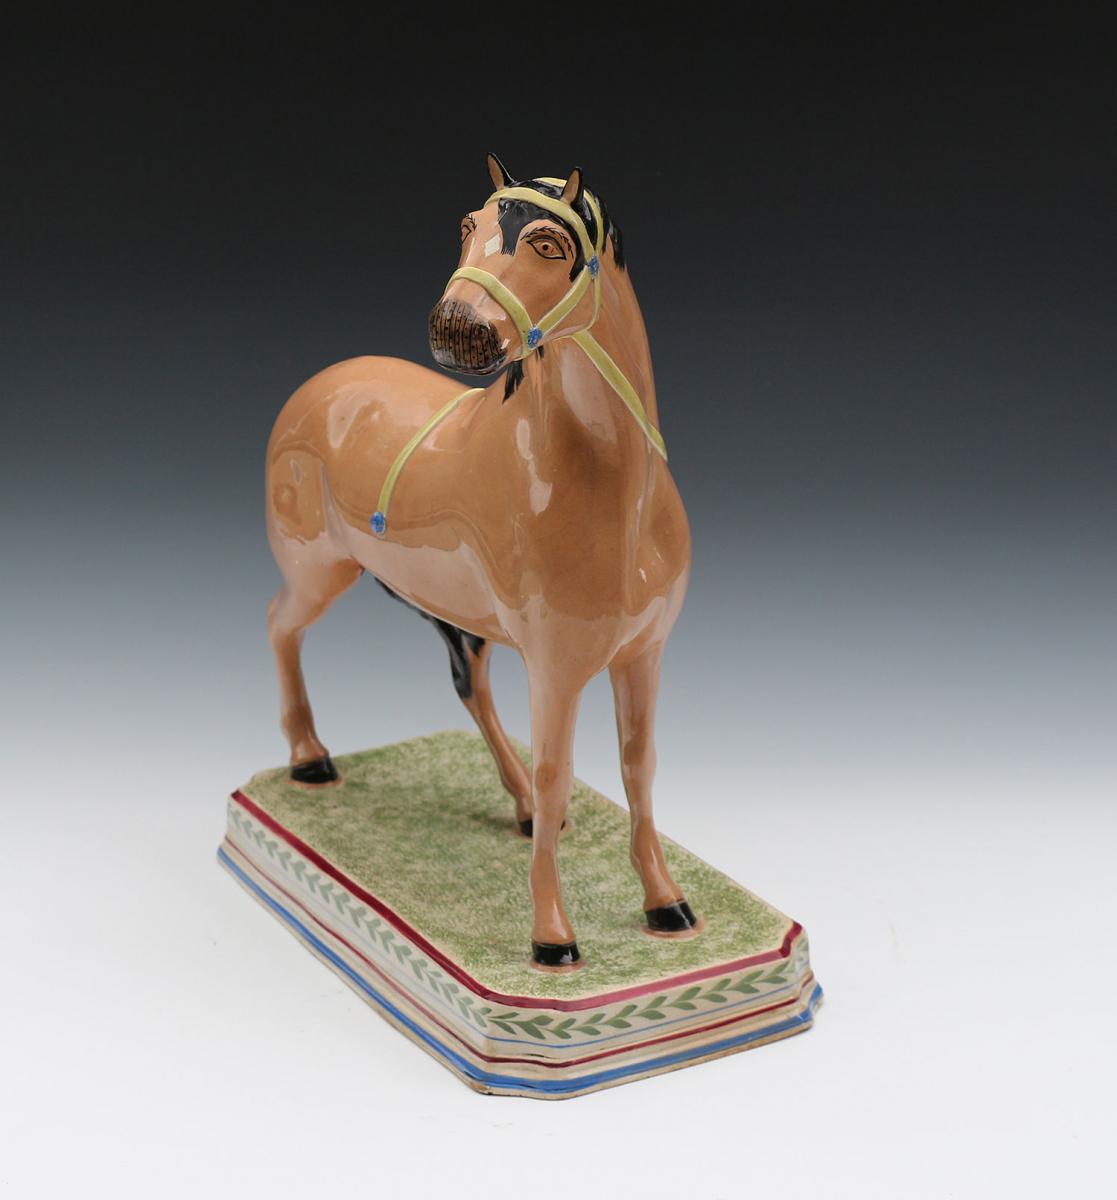 Antique pearlware pottery figure of a horse attributed to the Leeds Pottery early 19th century